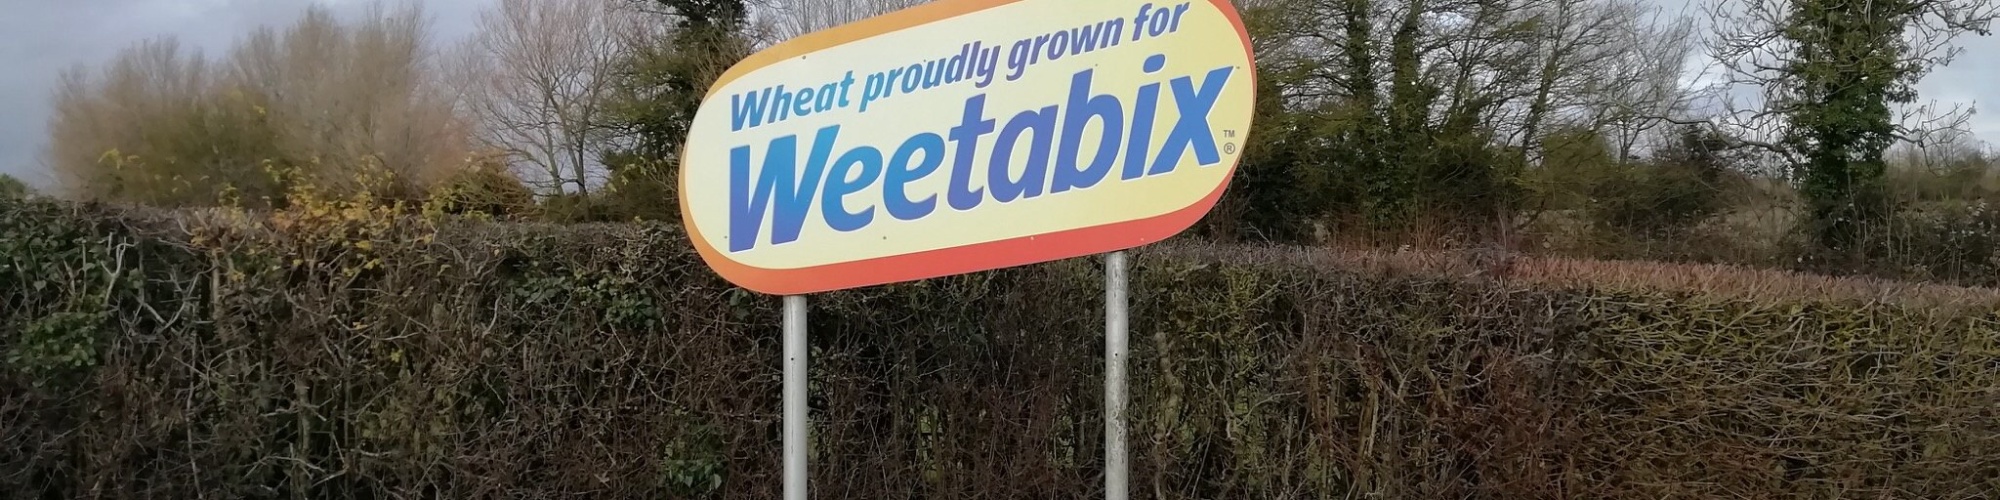 Photo by Mick Baker via Flickr. A sign of weetabix next to field